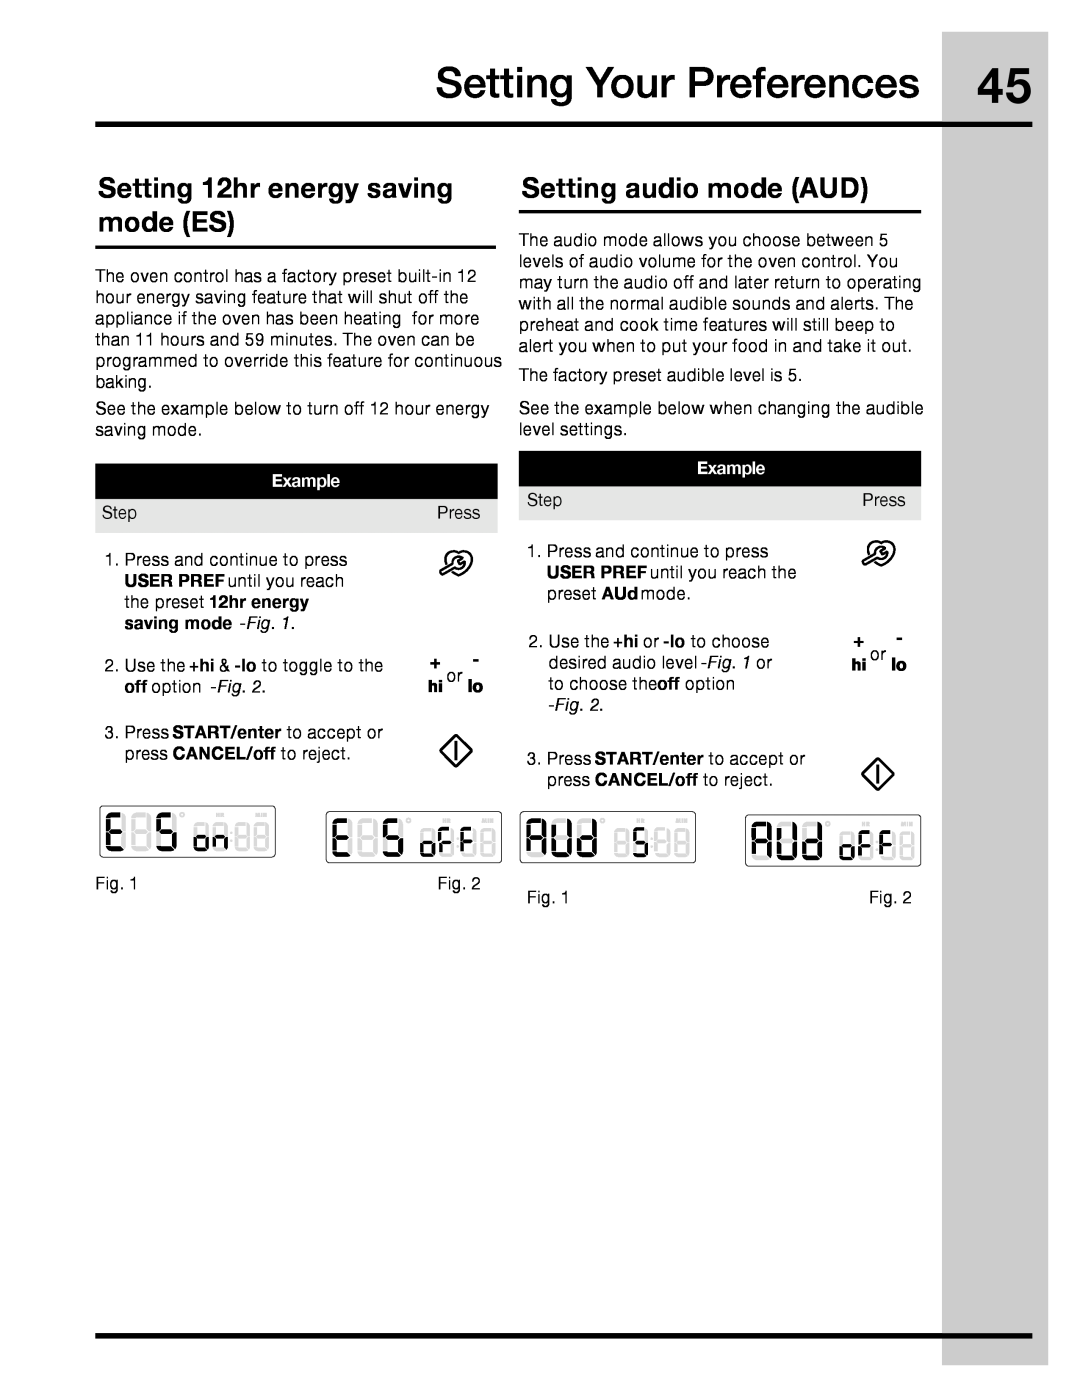 Electrolux 316471110 Setting 12hr energy saving mode ES, Setting audio mode AUD, off option -Fig, Setting Your Preferences 